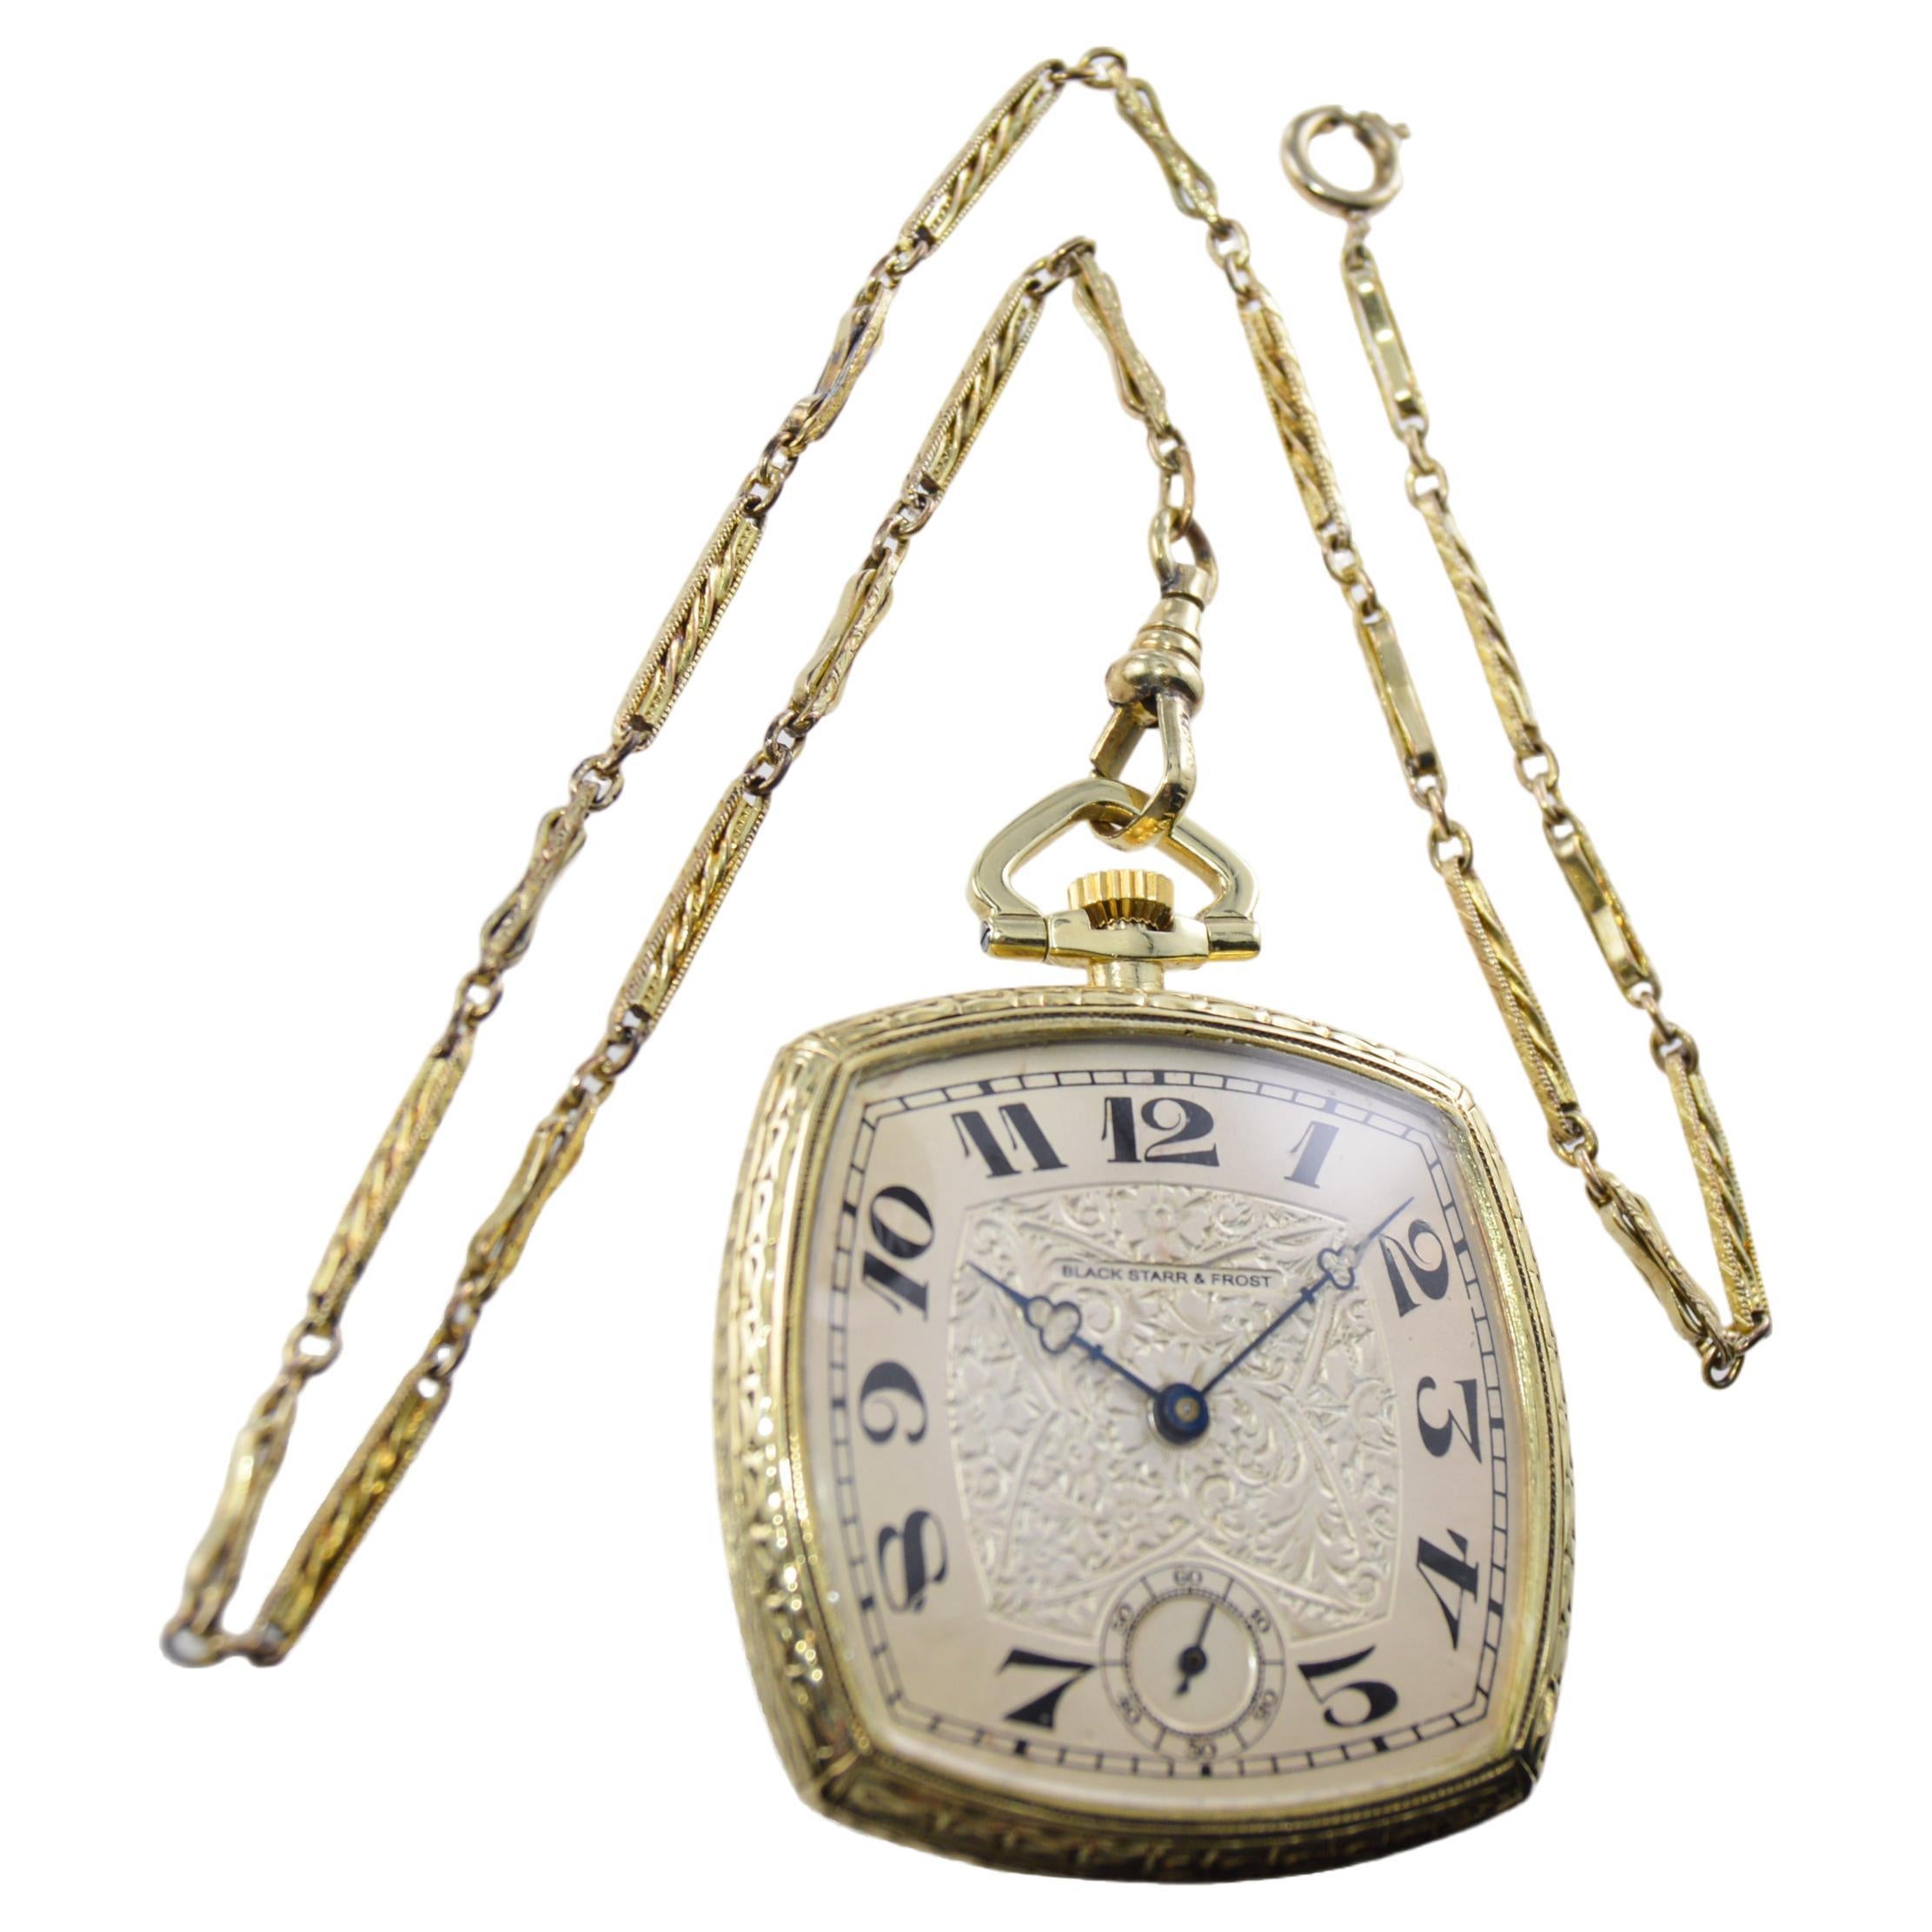 Black Starr & Frost 14 Karat Gold Art Deco Pocket Watch with Engraved Dial  For Sale